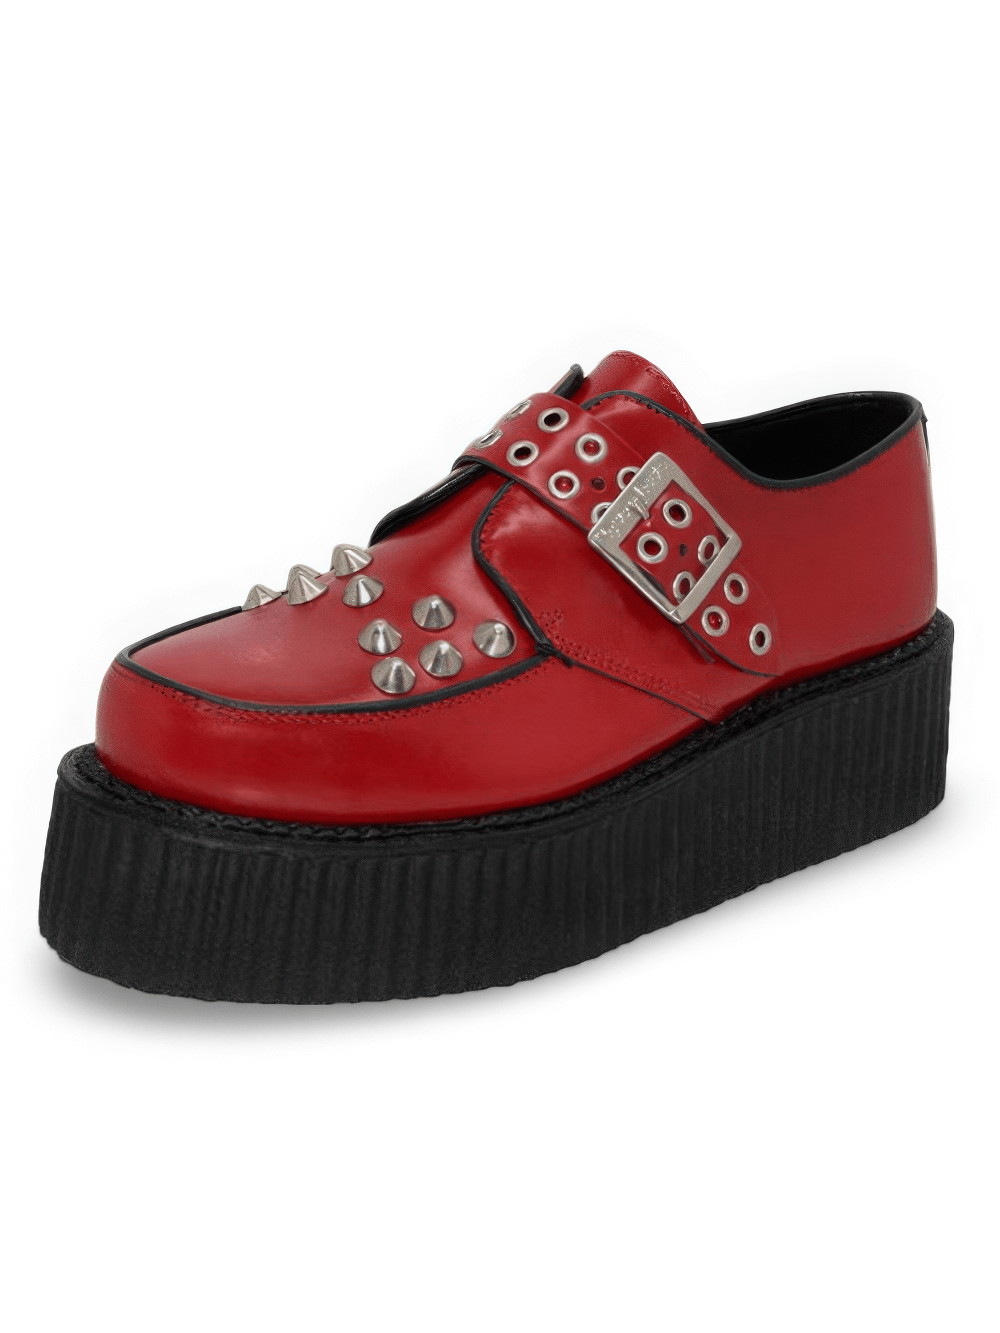 Red Leather Creepers with Studded Details and Buckle